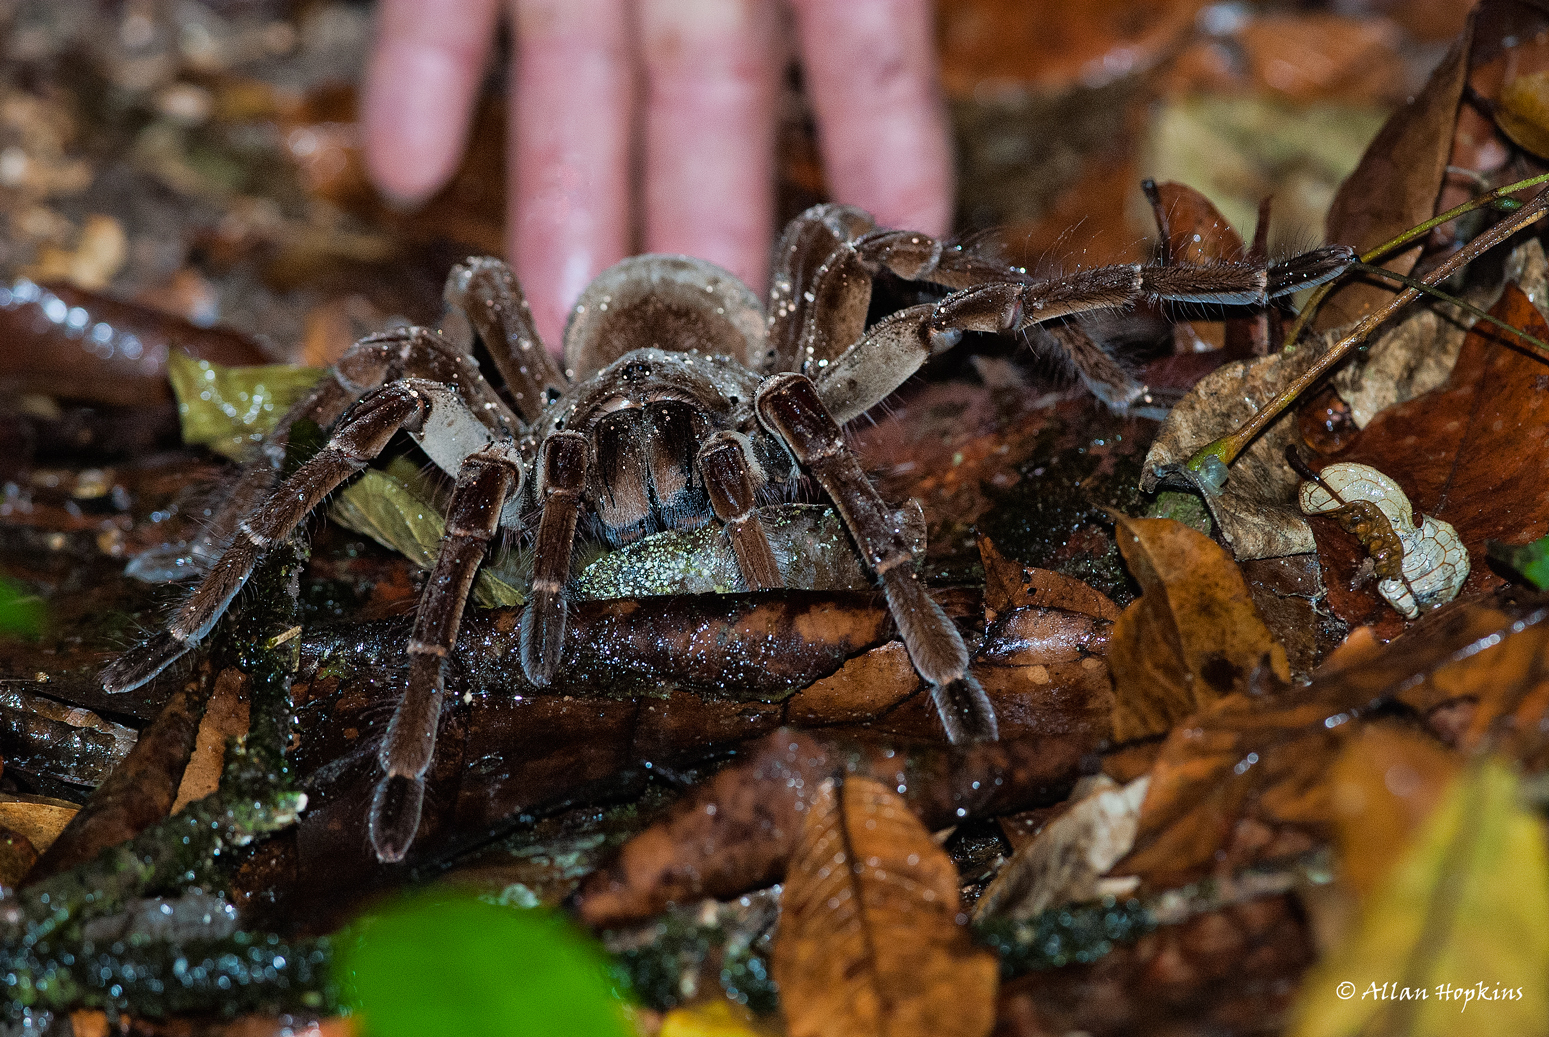 PHOTO: Goliath birdeaters can have up to a 12 inch leg span.